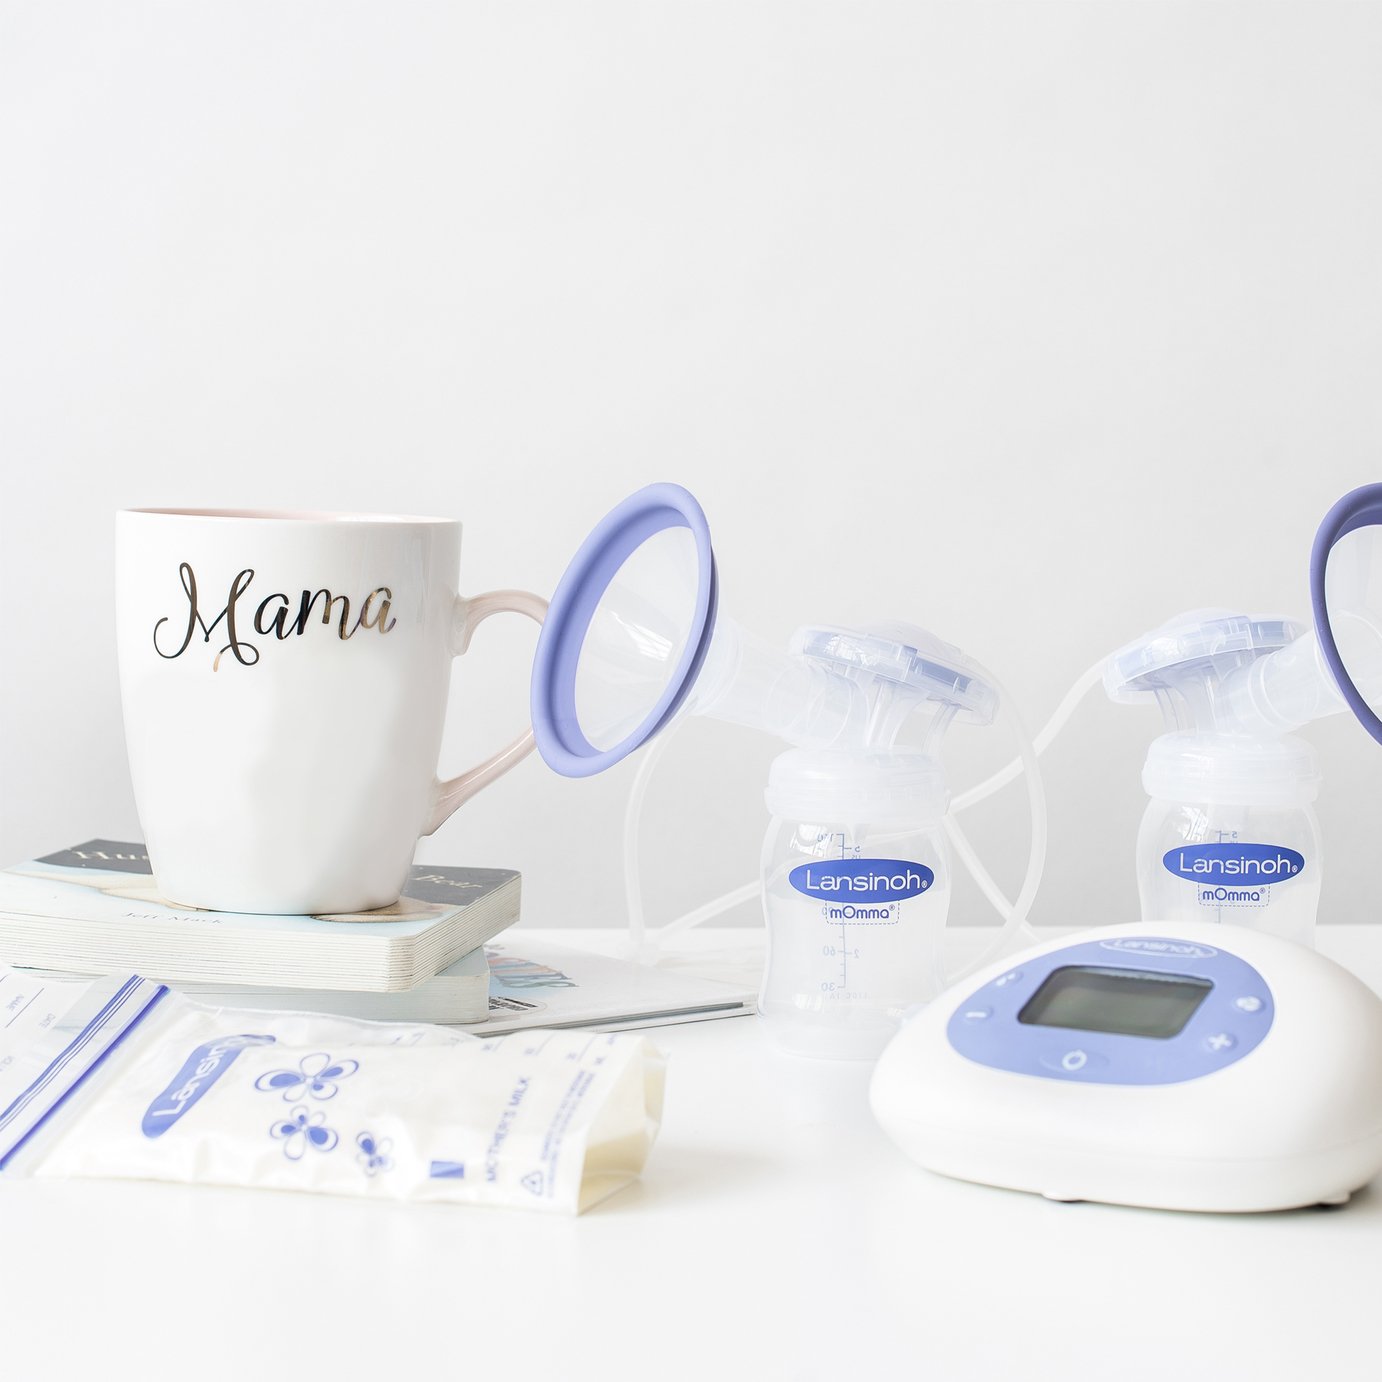 Lansinoh 2-in-1 Double Electric Breast Pump Review